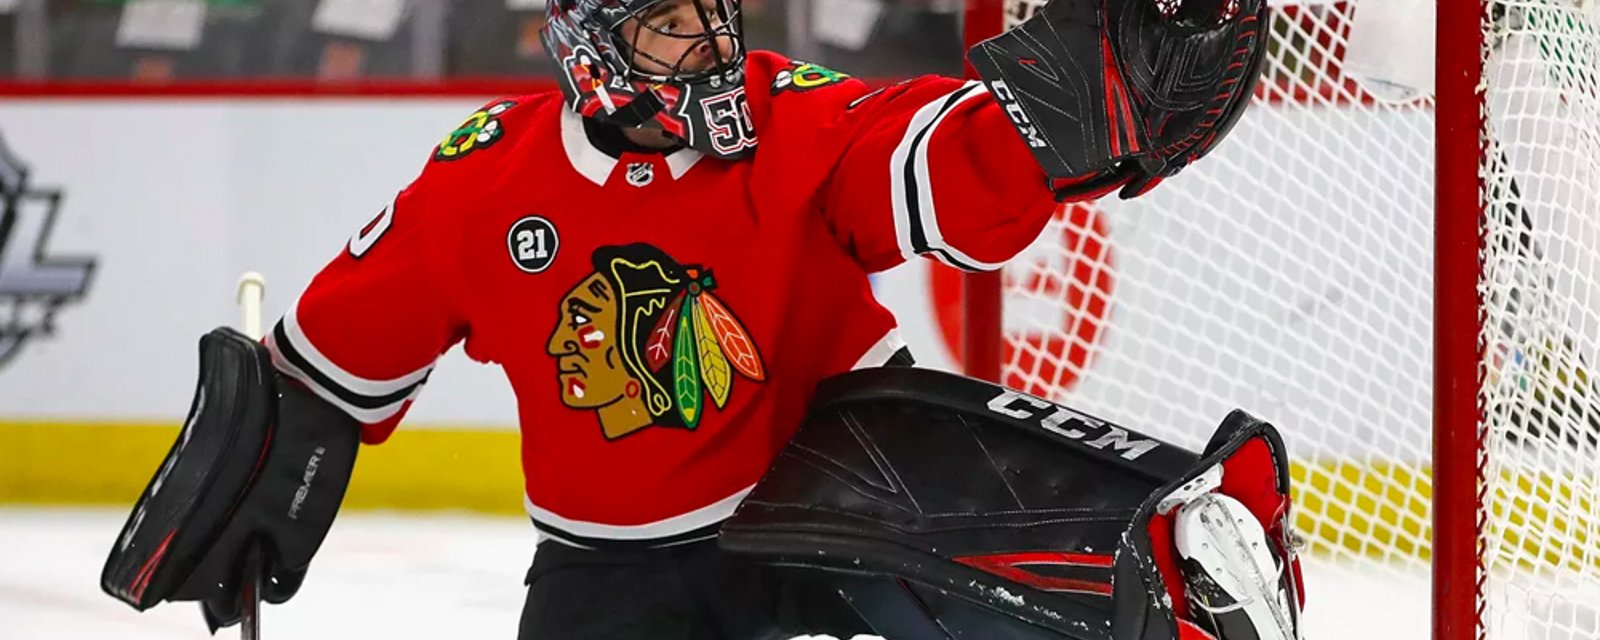 Crawford deemed “unfit to play”, concern over his NHL future